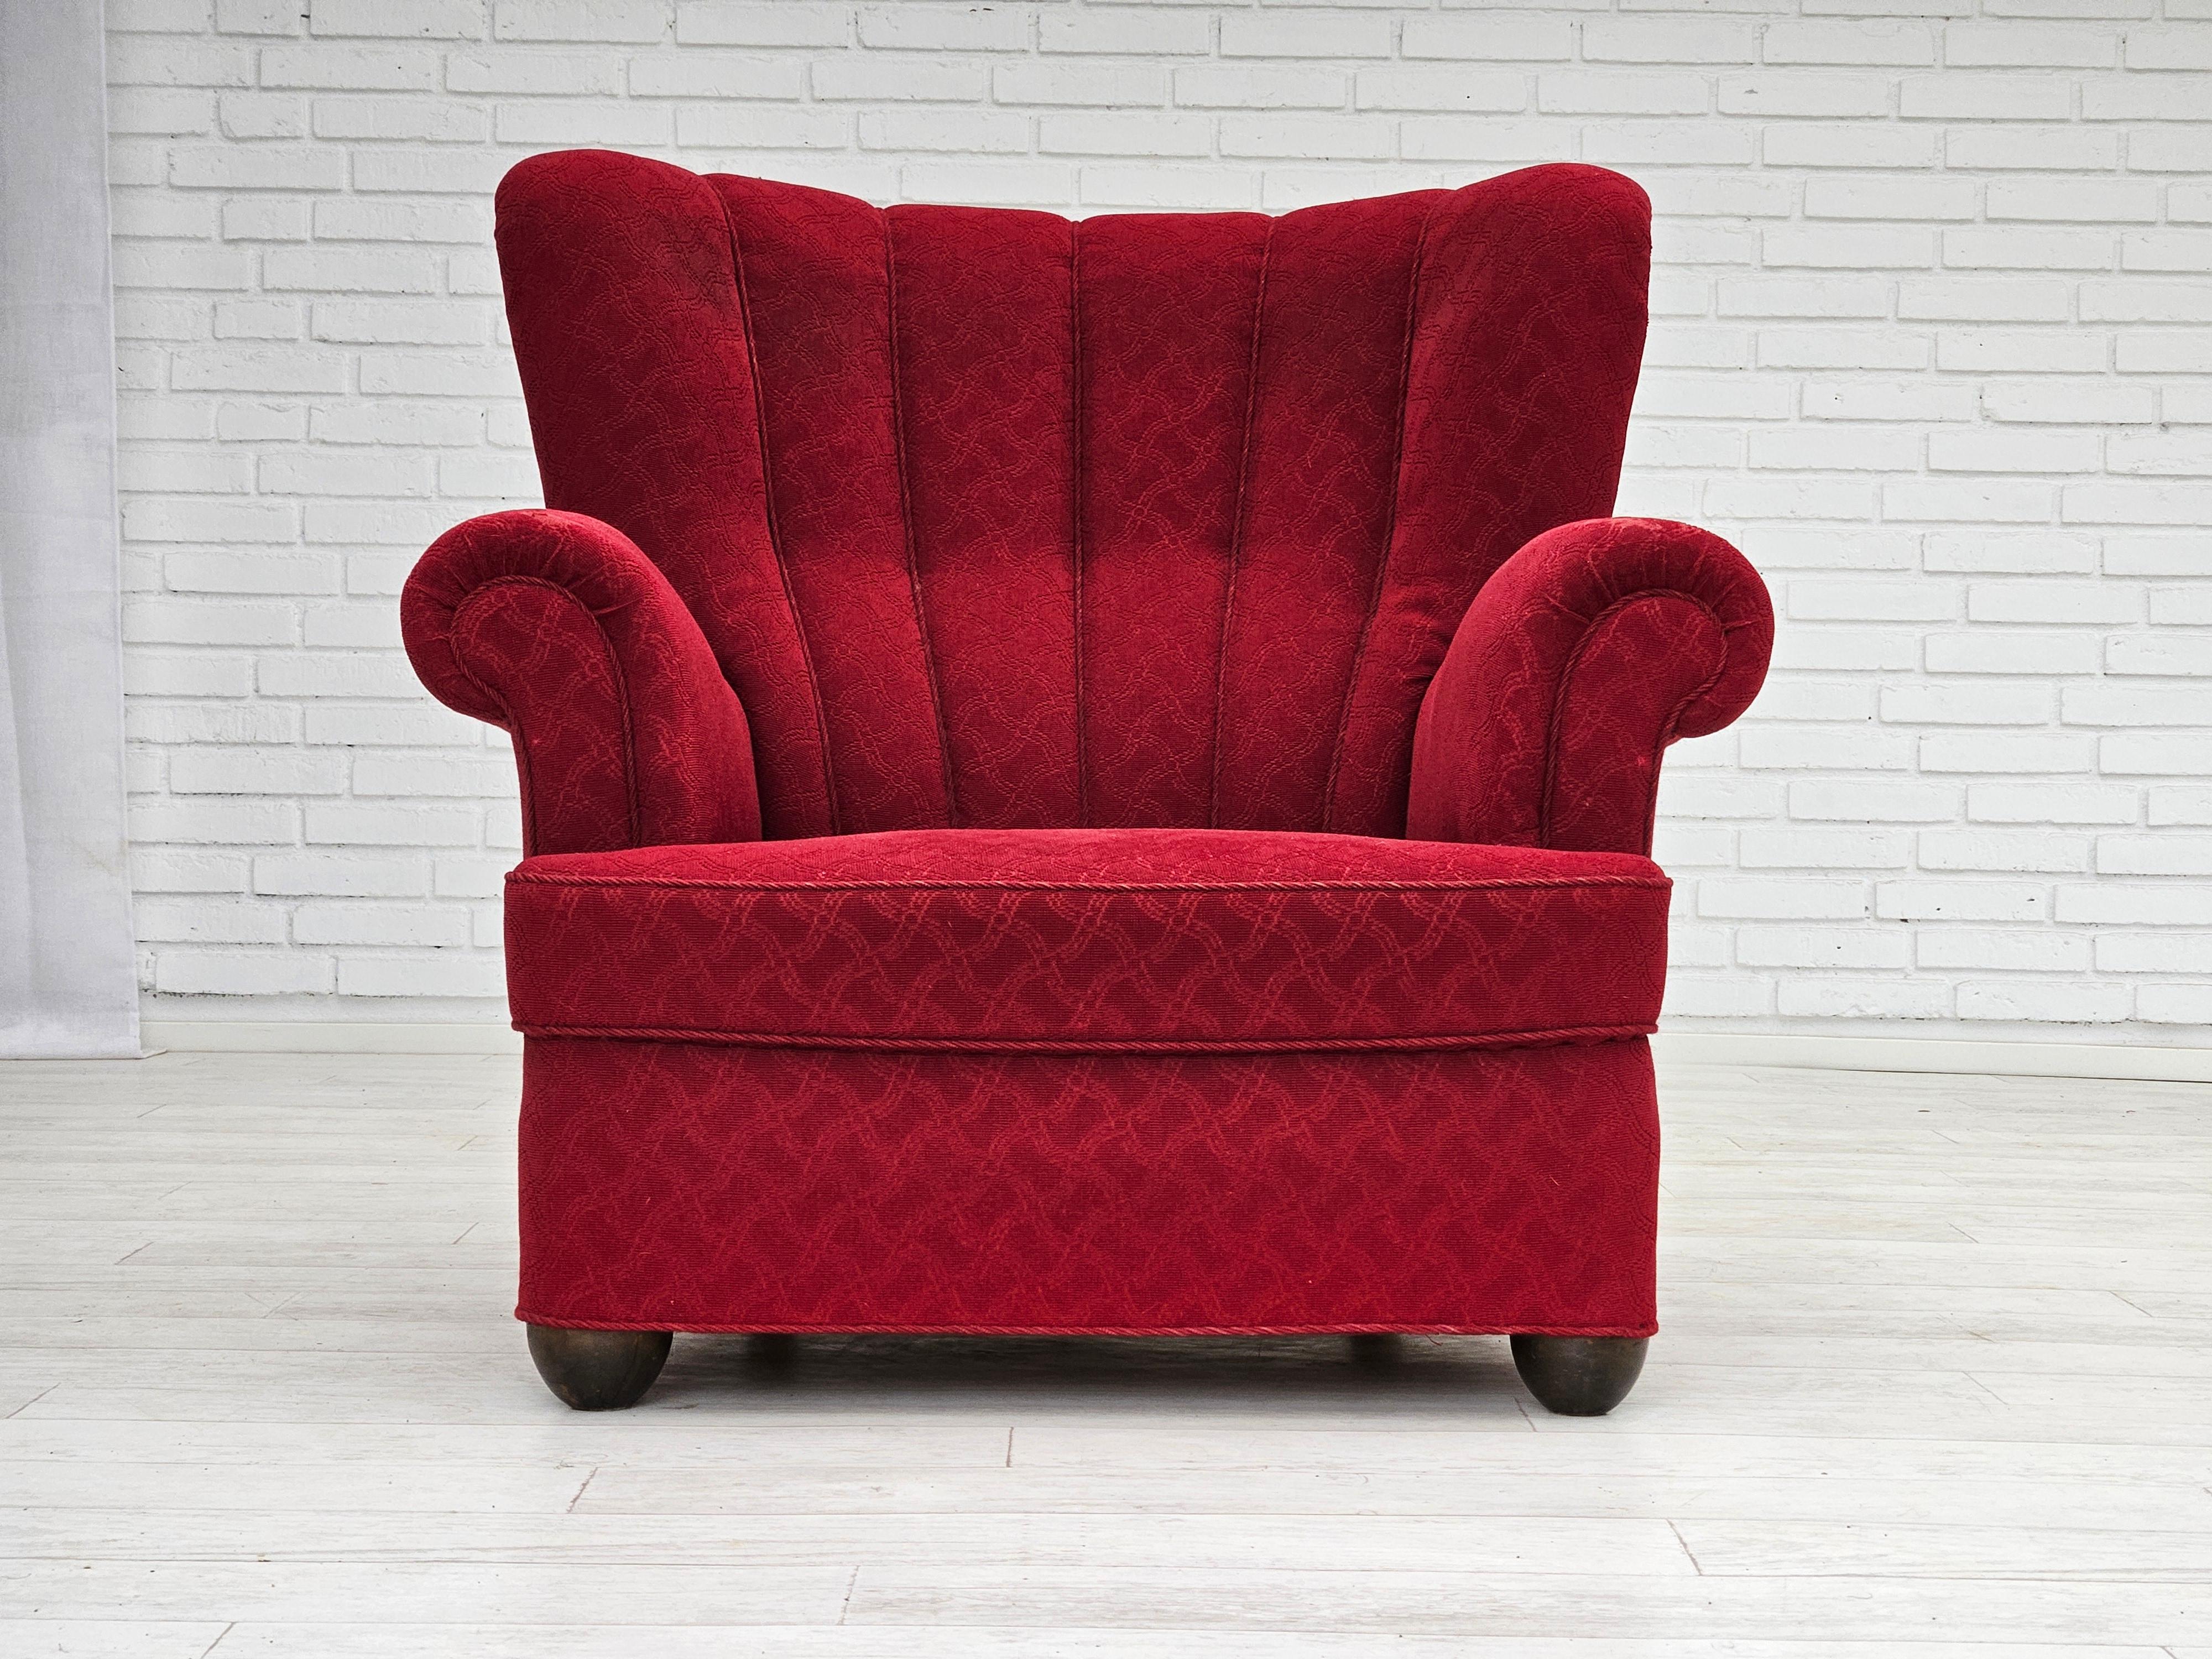 1960s, Danish relax chair in original good condition: no smells and no stains. Original red cotton /wool furniture fabric, oak wood legs, brass springs in the seat. The fabric surface on the front armrest is slightly worn. Manufactured by Danish